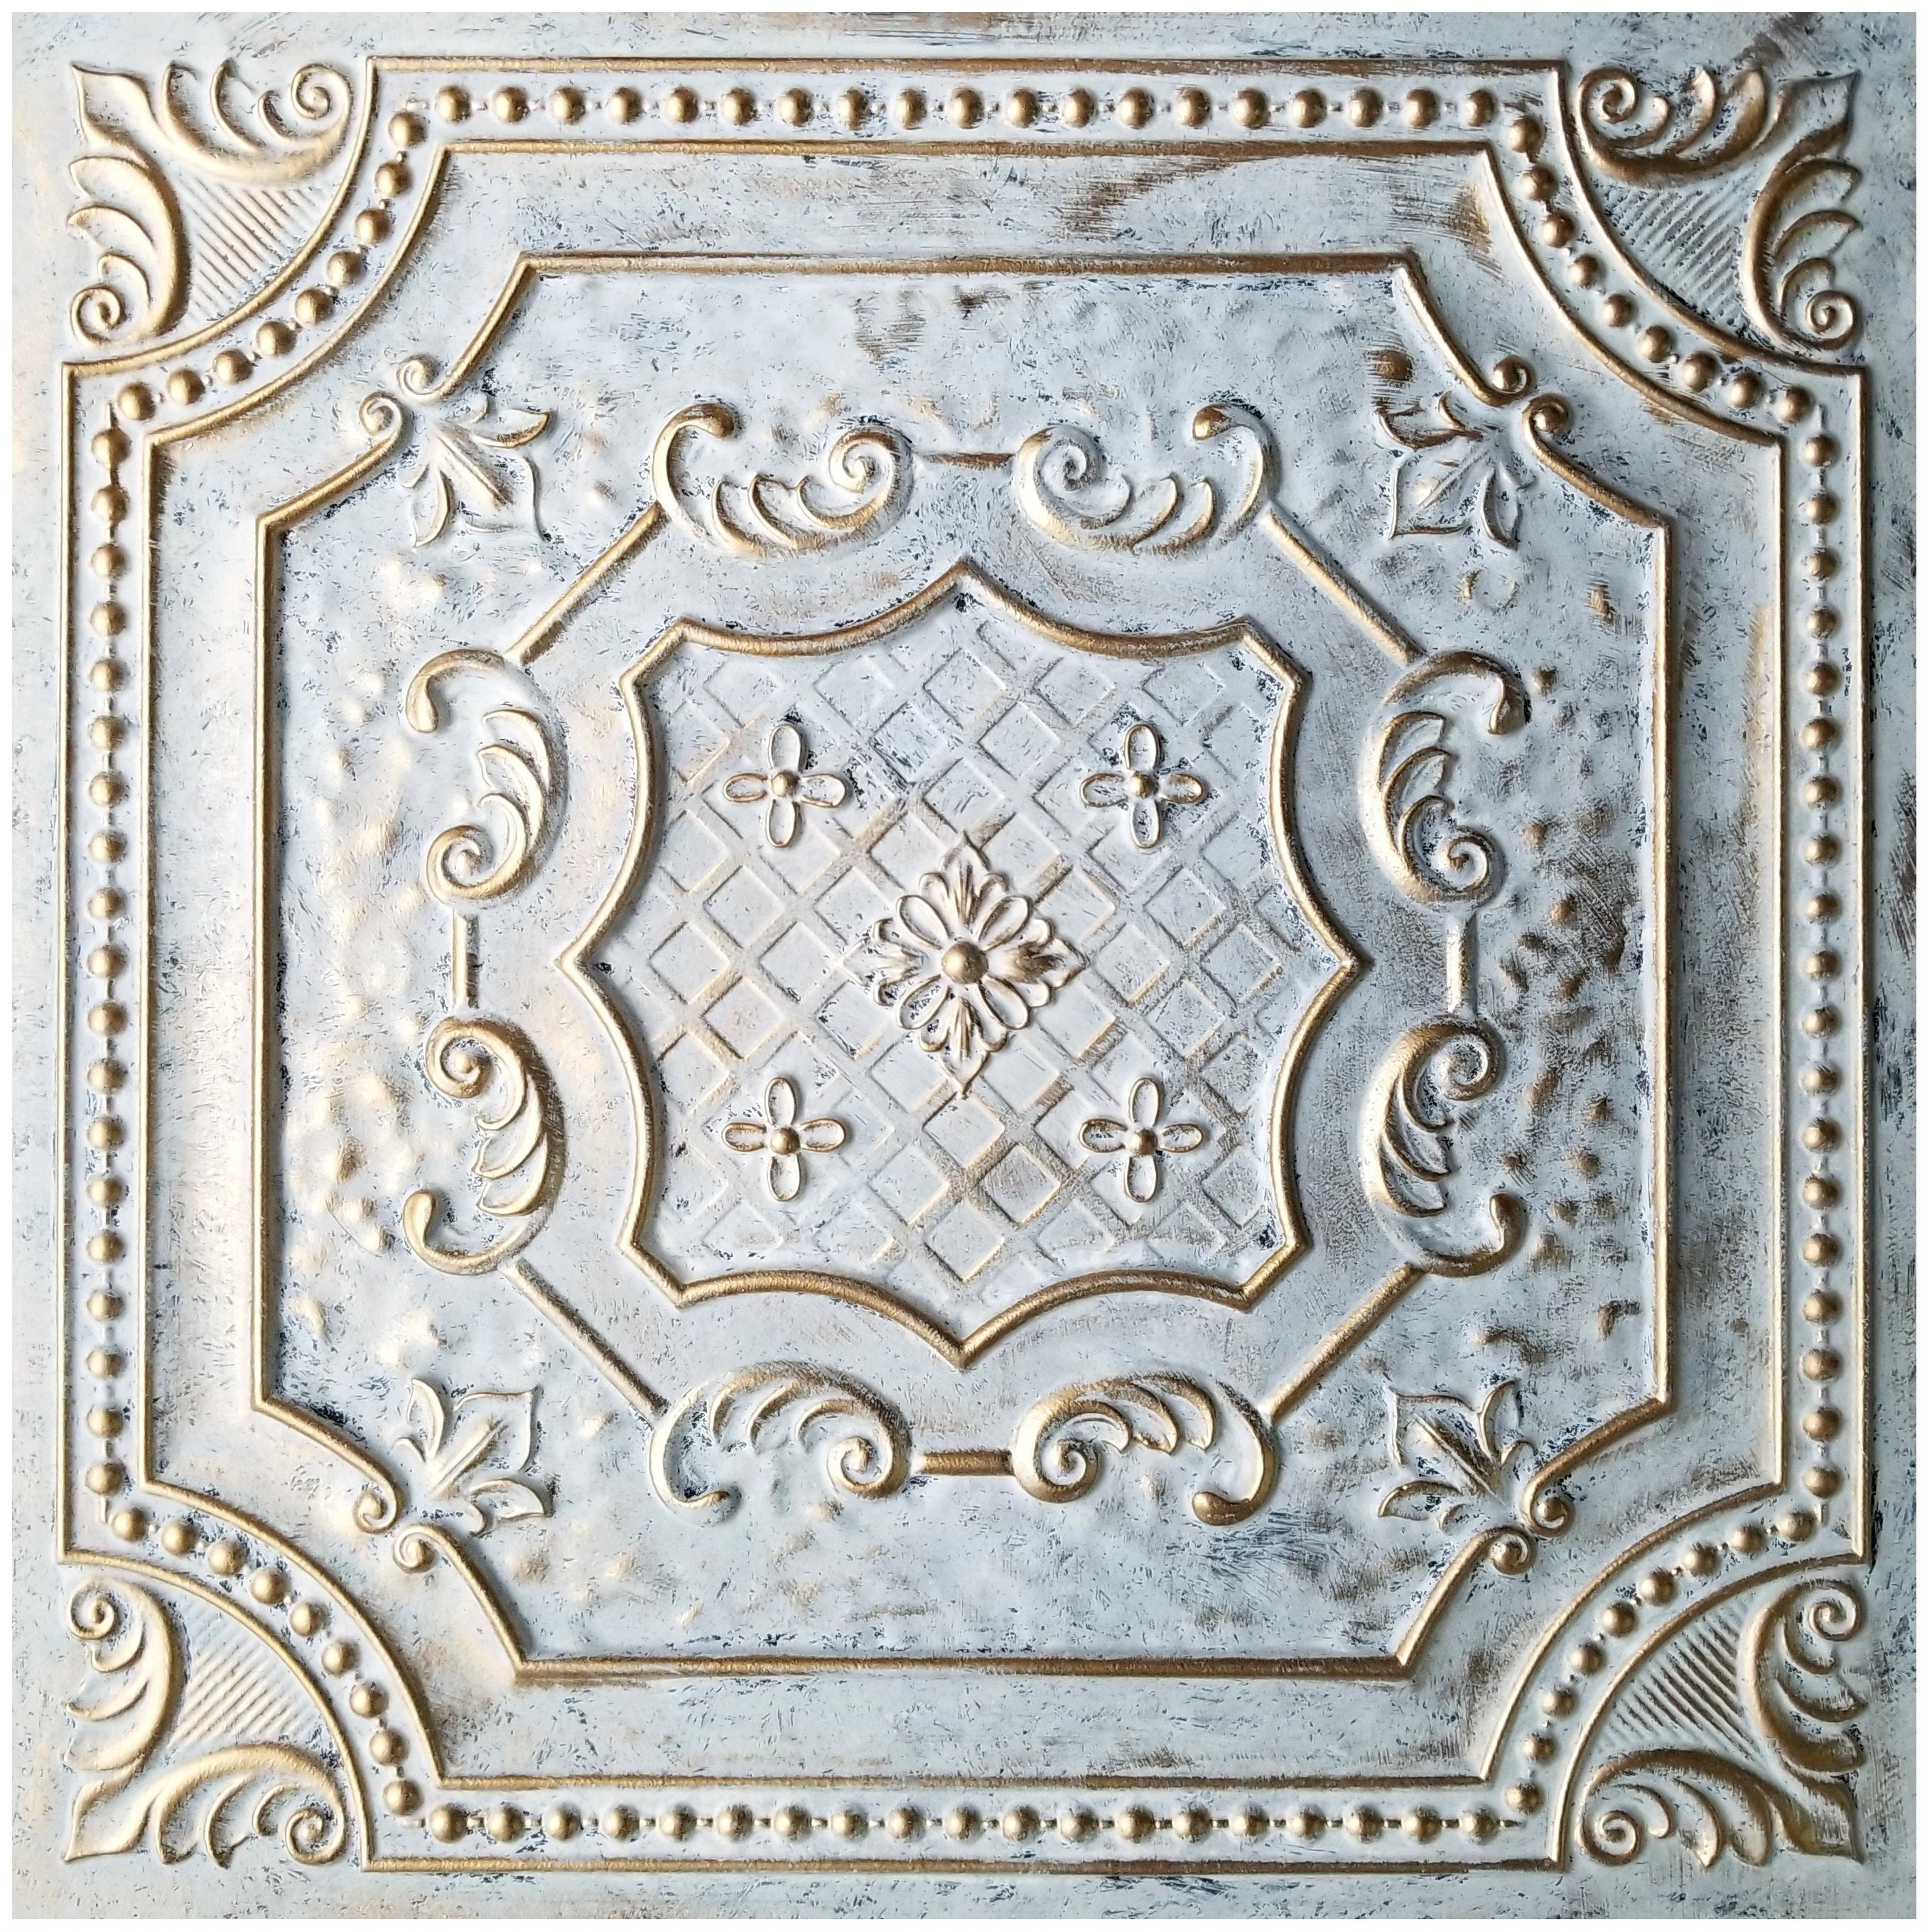 ~ 20 sq.ft Pack of 5 2X2 Panels Easy to Install Decorative Ceiling Tiles #TD04 Great as a Backdrop. Gorgeous Antique Look PVC Tiles Faux Tin Glue up or Drop in Ceiling Tile in Aged Copper